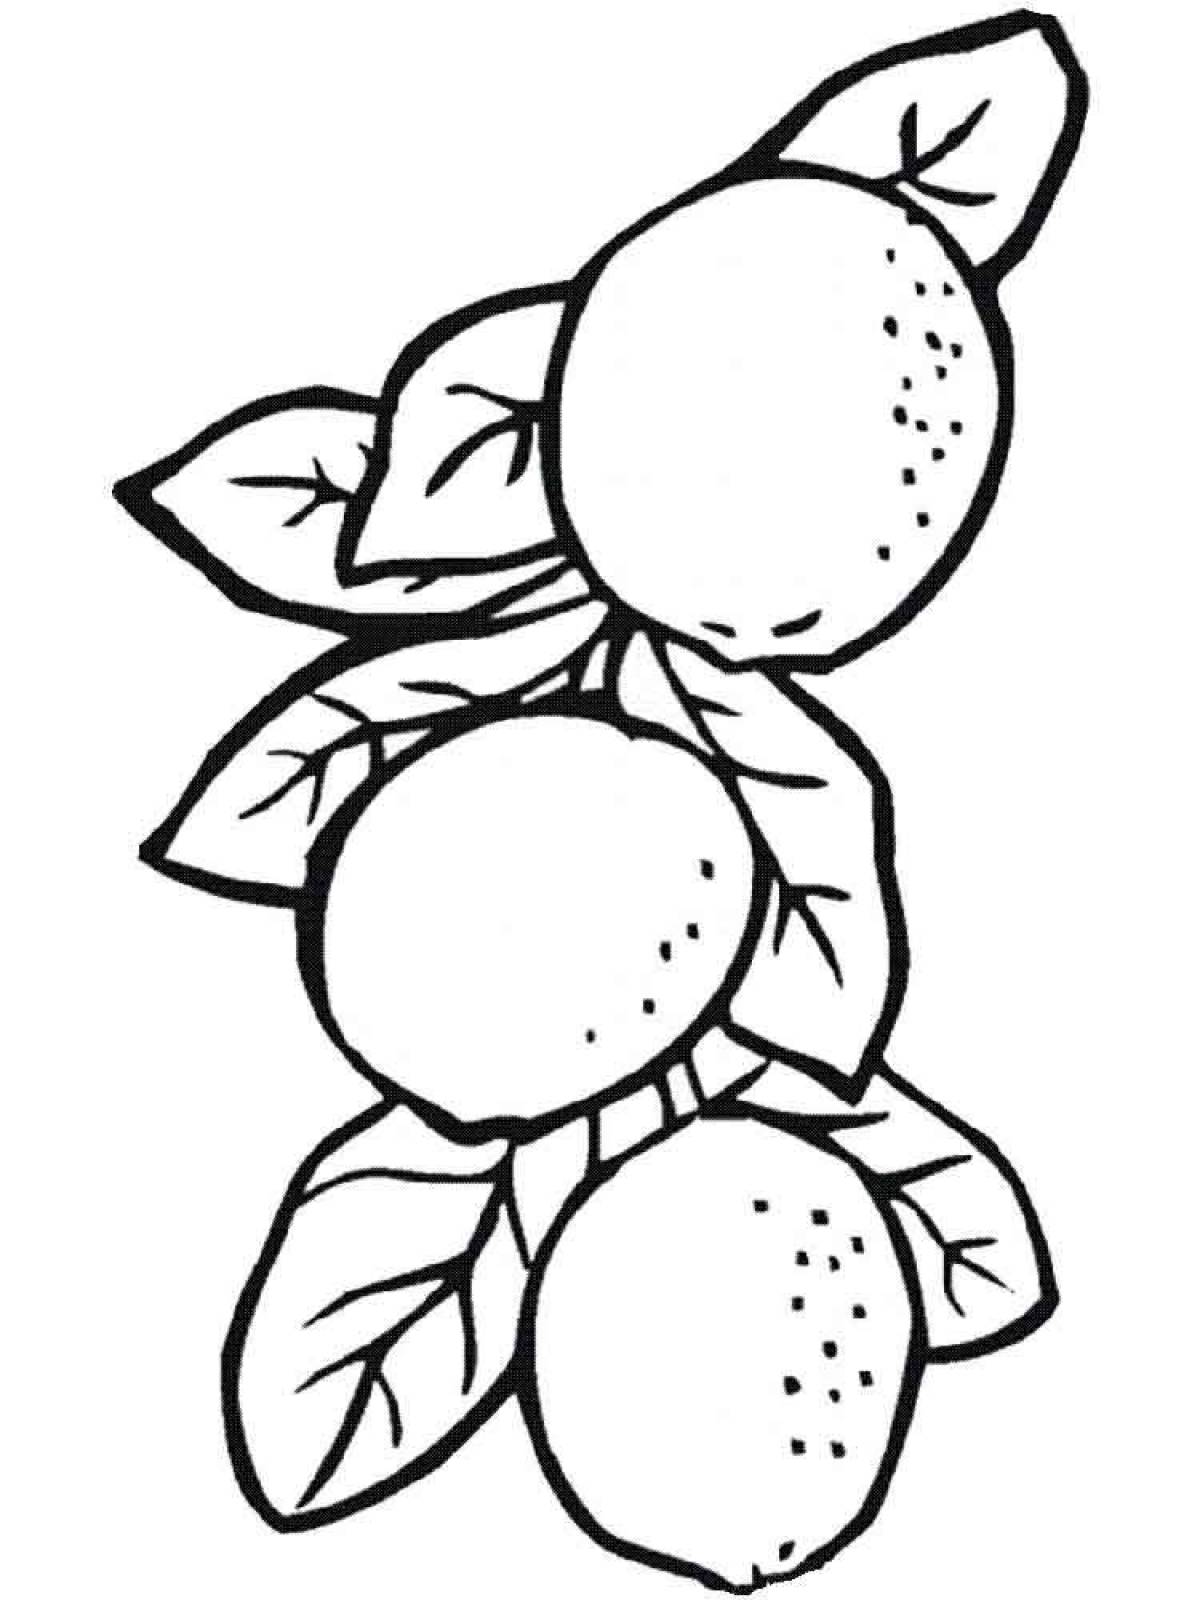 Awesome lemon coloring page for kids